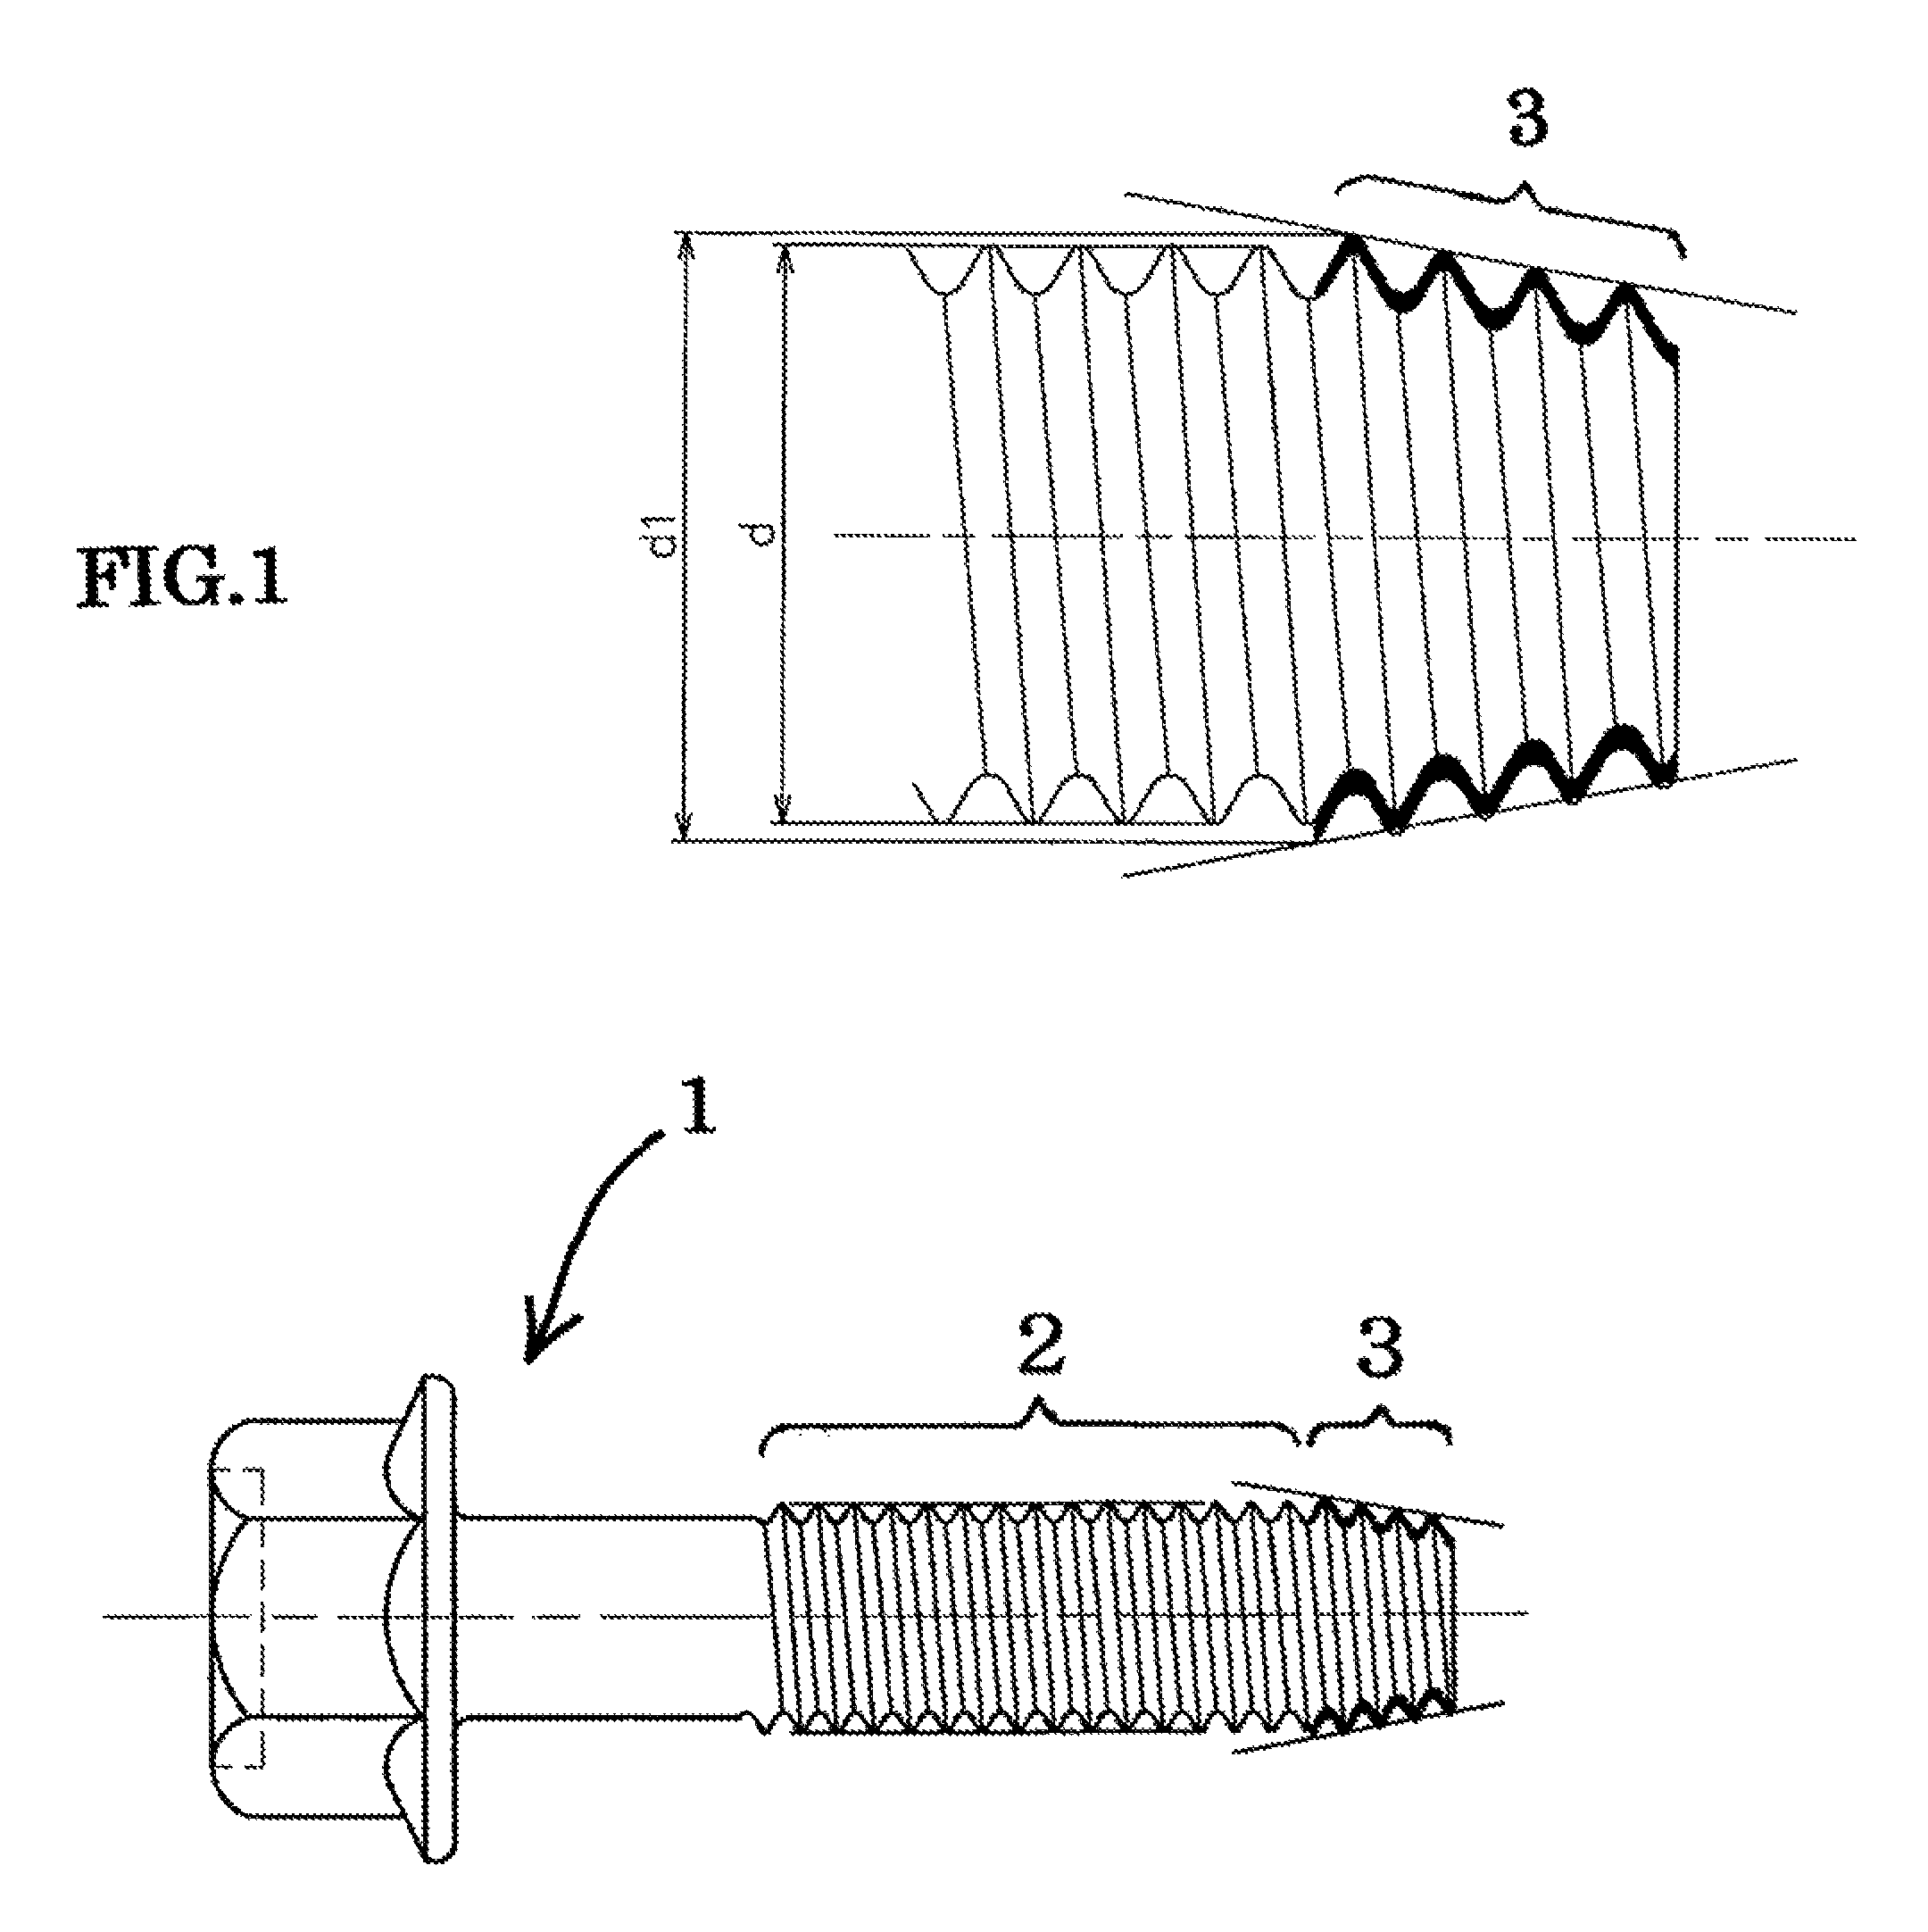 Tightening structure using high-strength self-forming screws